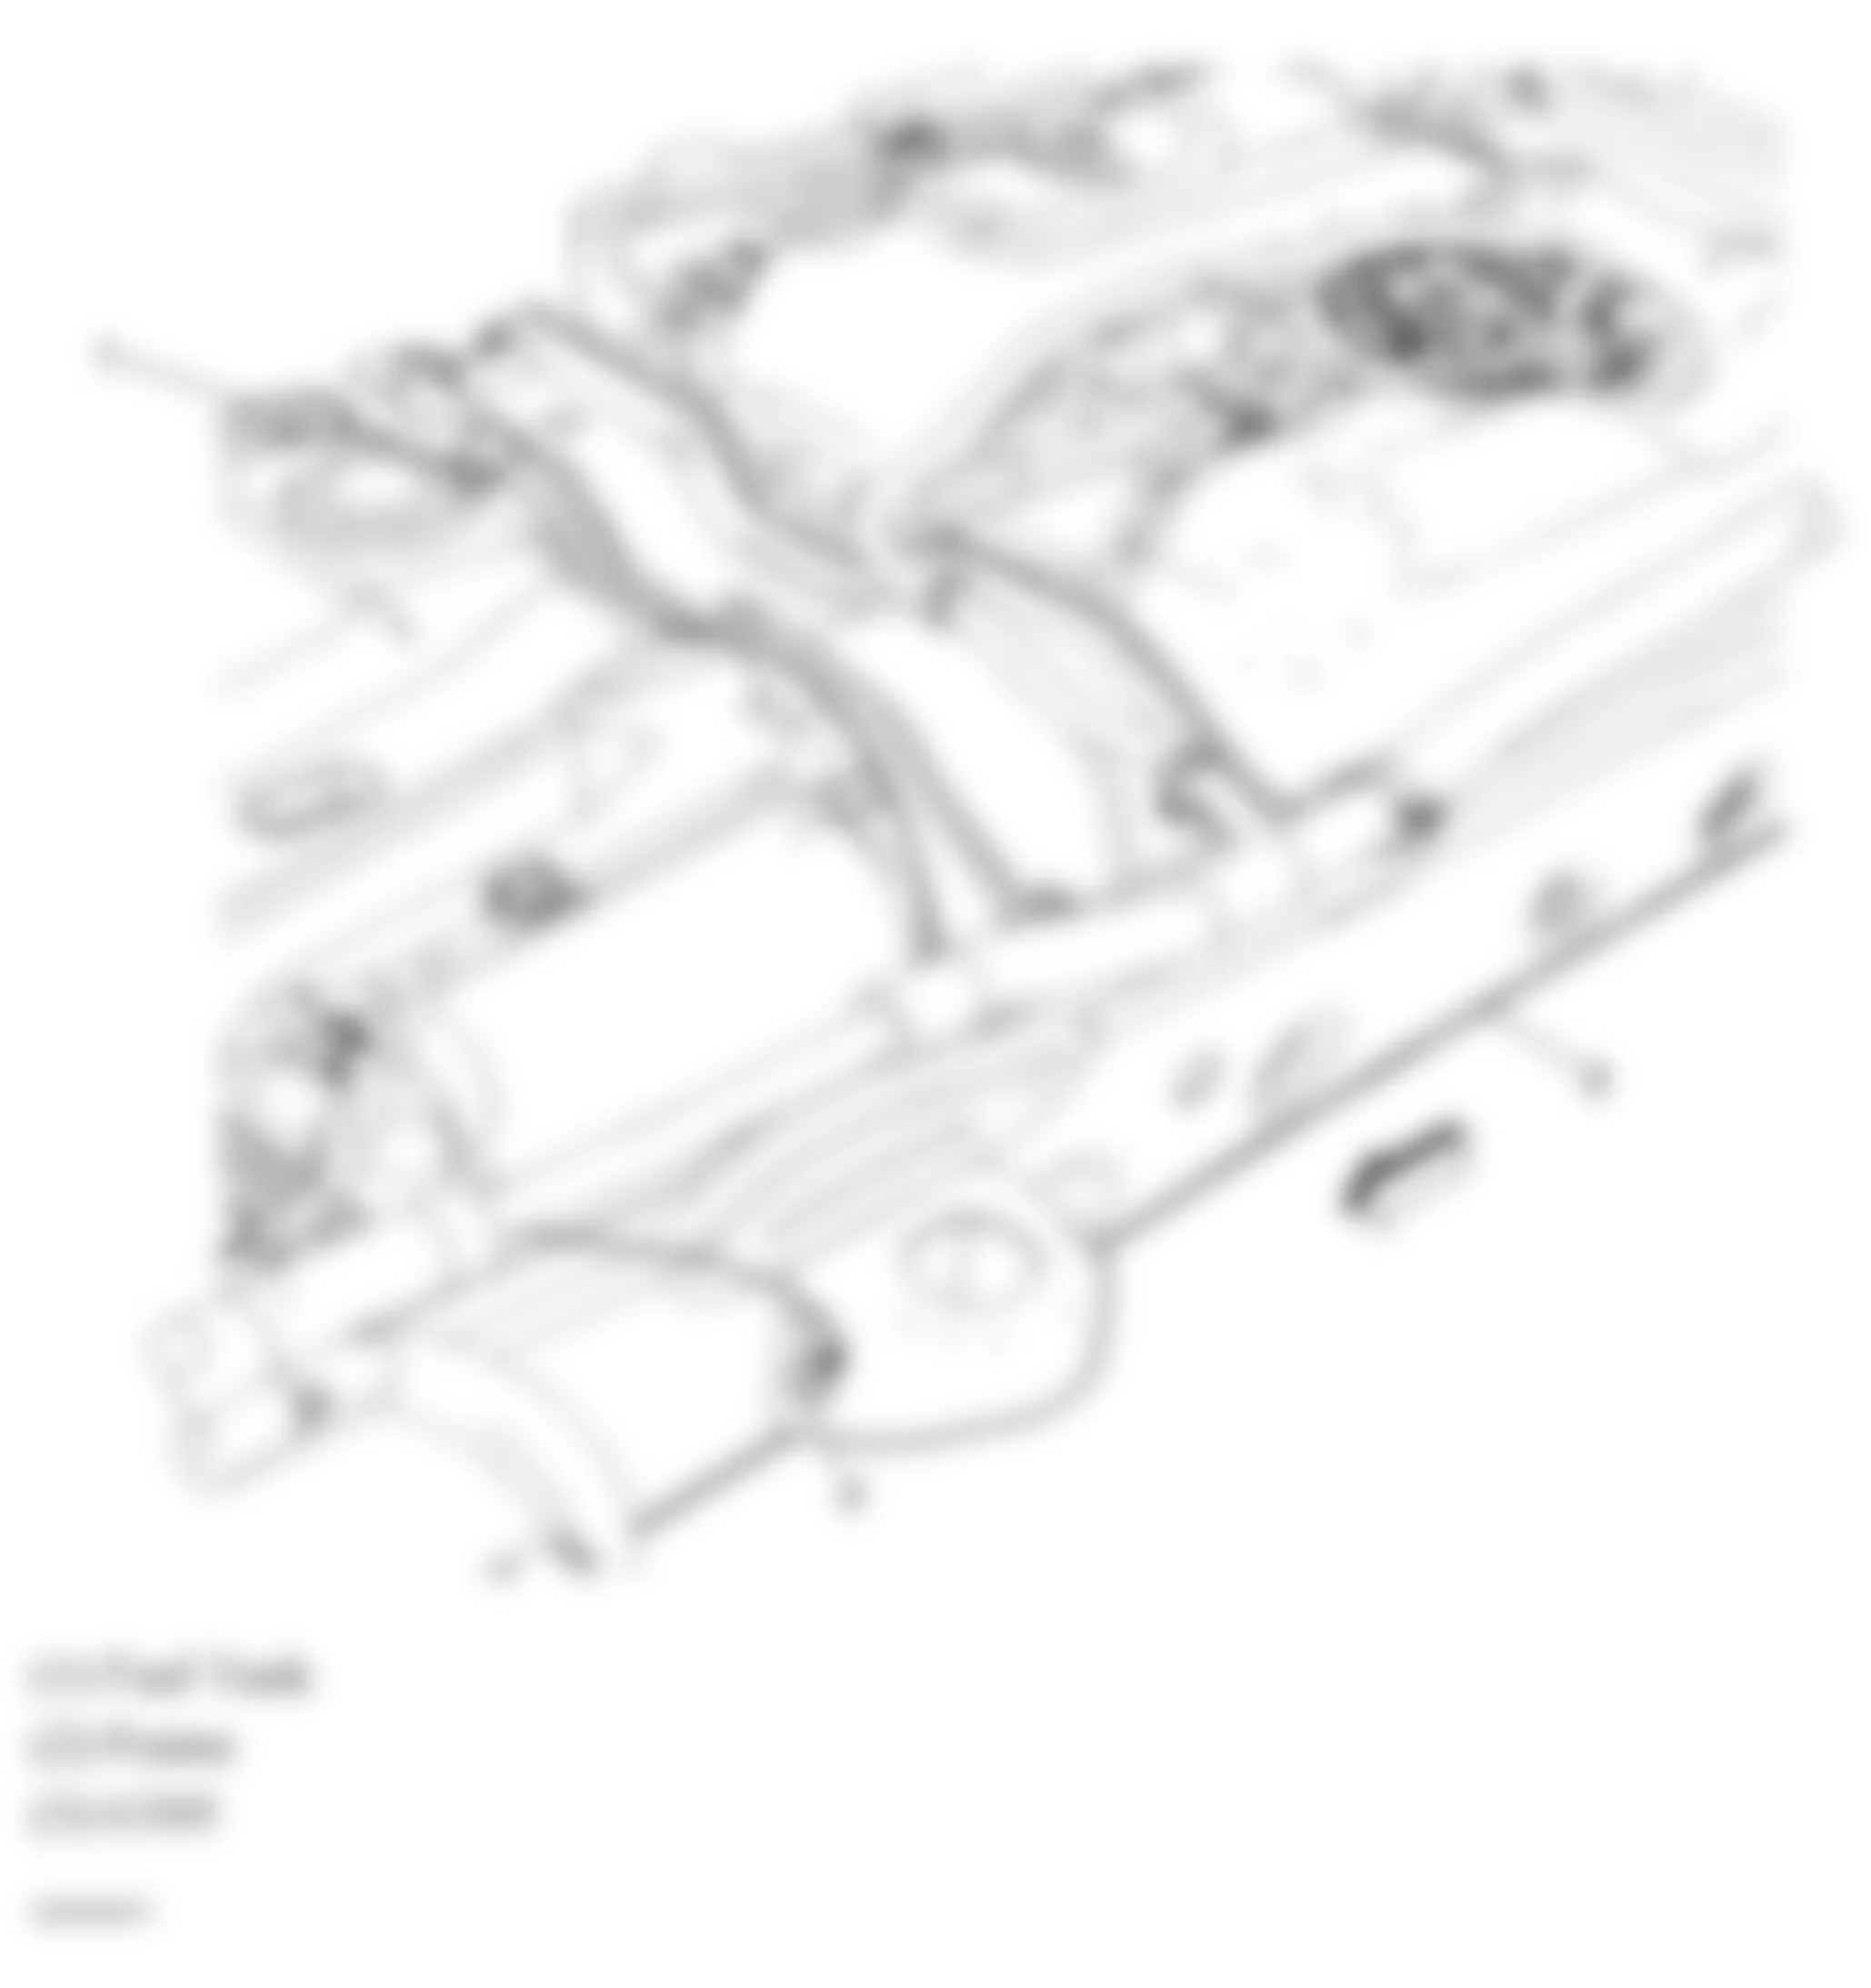 GMC Yukon XL K1500 2007 - Component Locations -  Rear Chassis